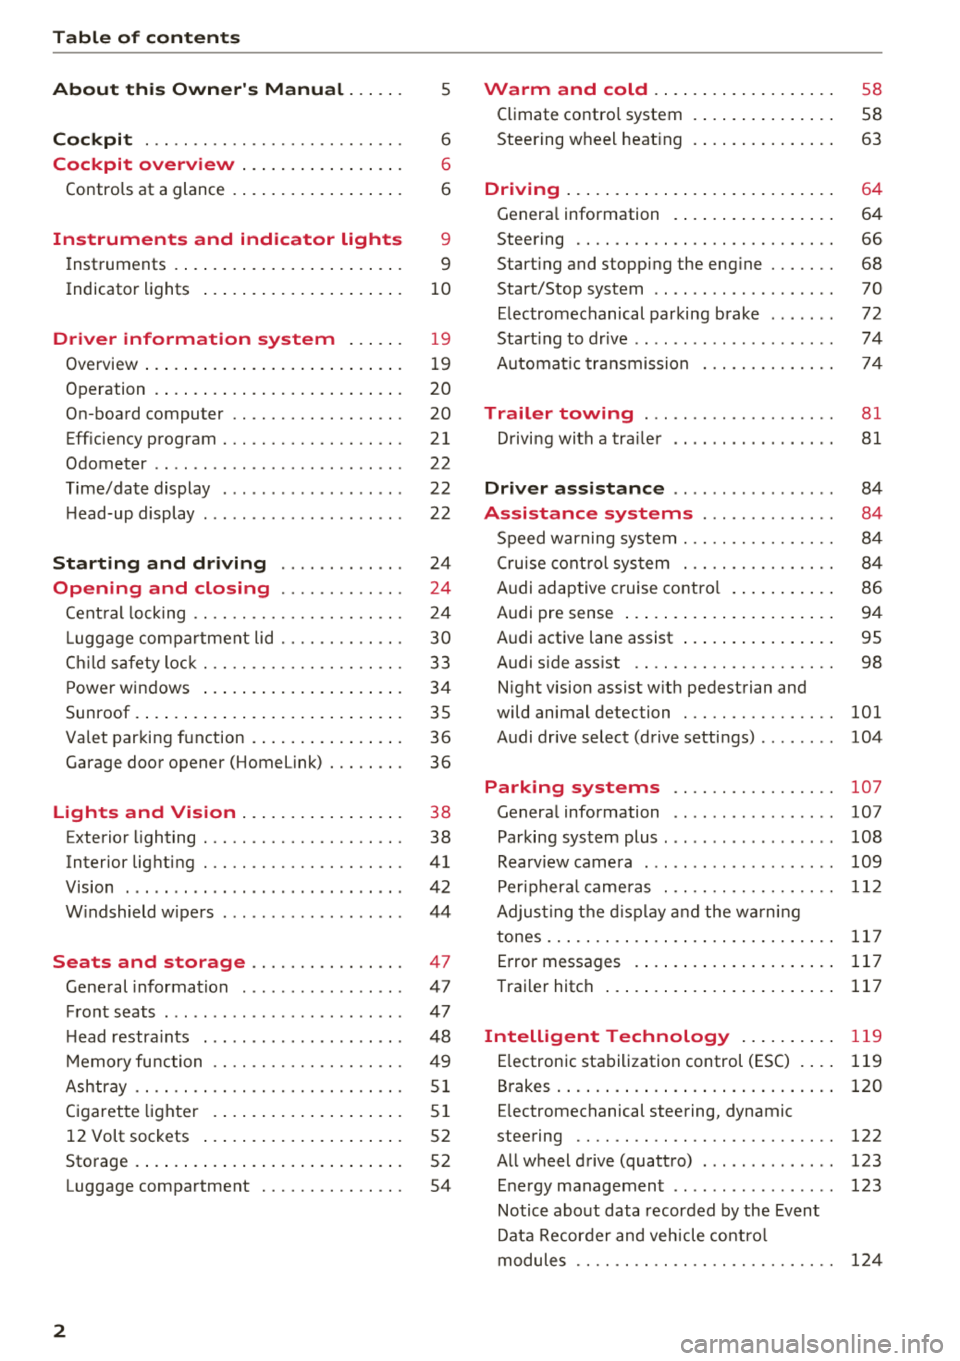 AUDI A6 2018  Owners Manual Table of  contents 
About  this  Owners  Manual  . .. .. . 
Cockpit  ... .. ............... .... ..  . 
Cockpit  overview  .. ..... ... .. .. .. . 
Controls  at  a glance  . .. ..... ... .. .. .. . 
